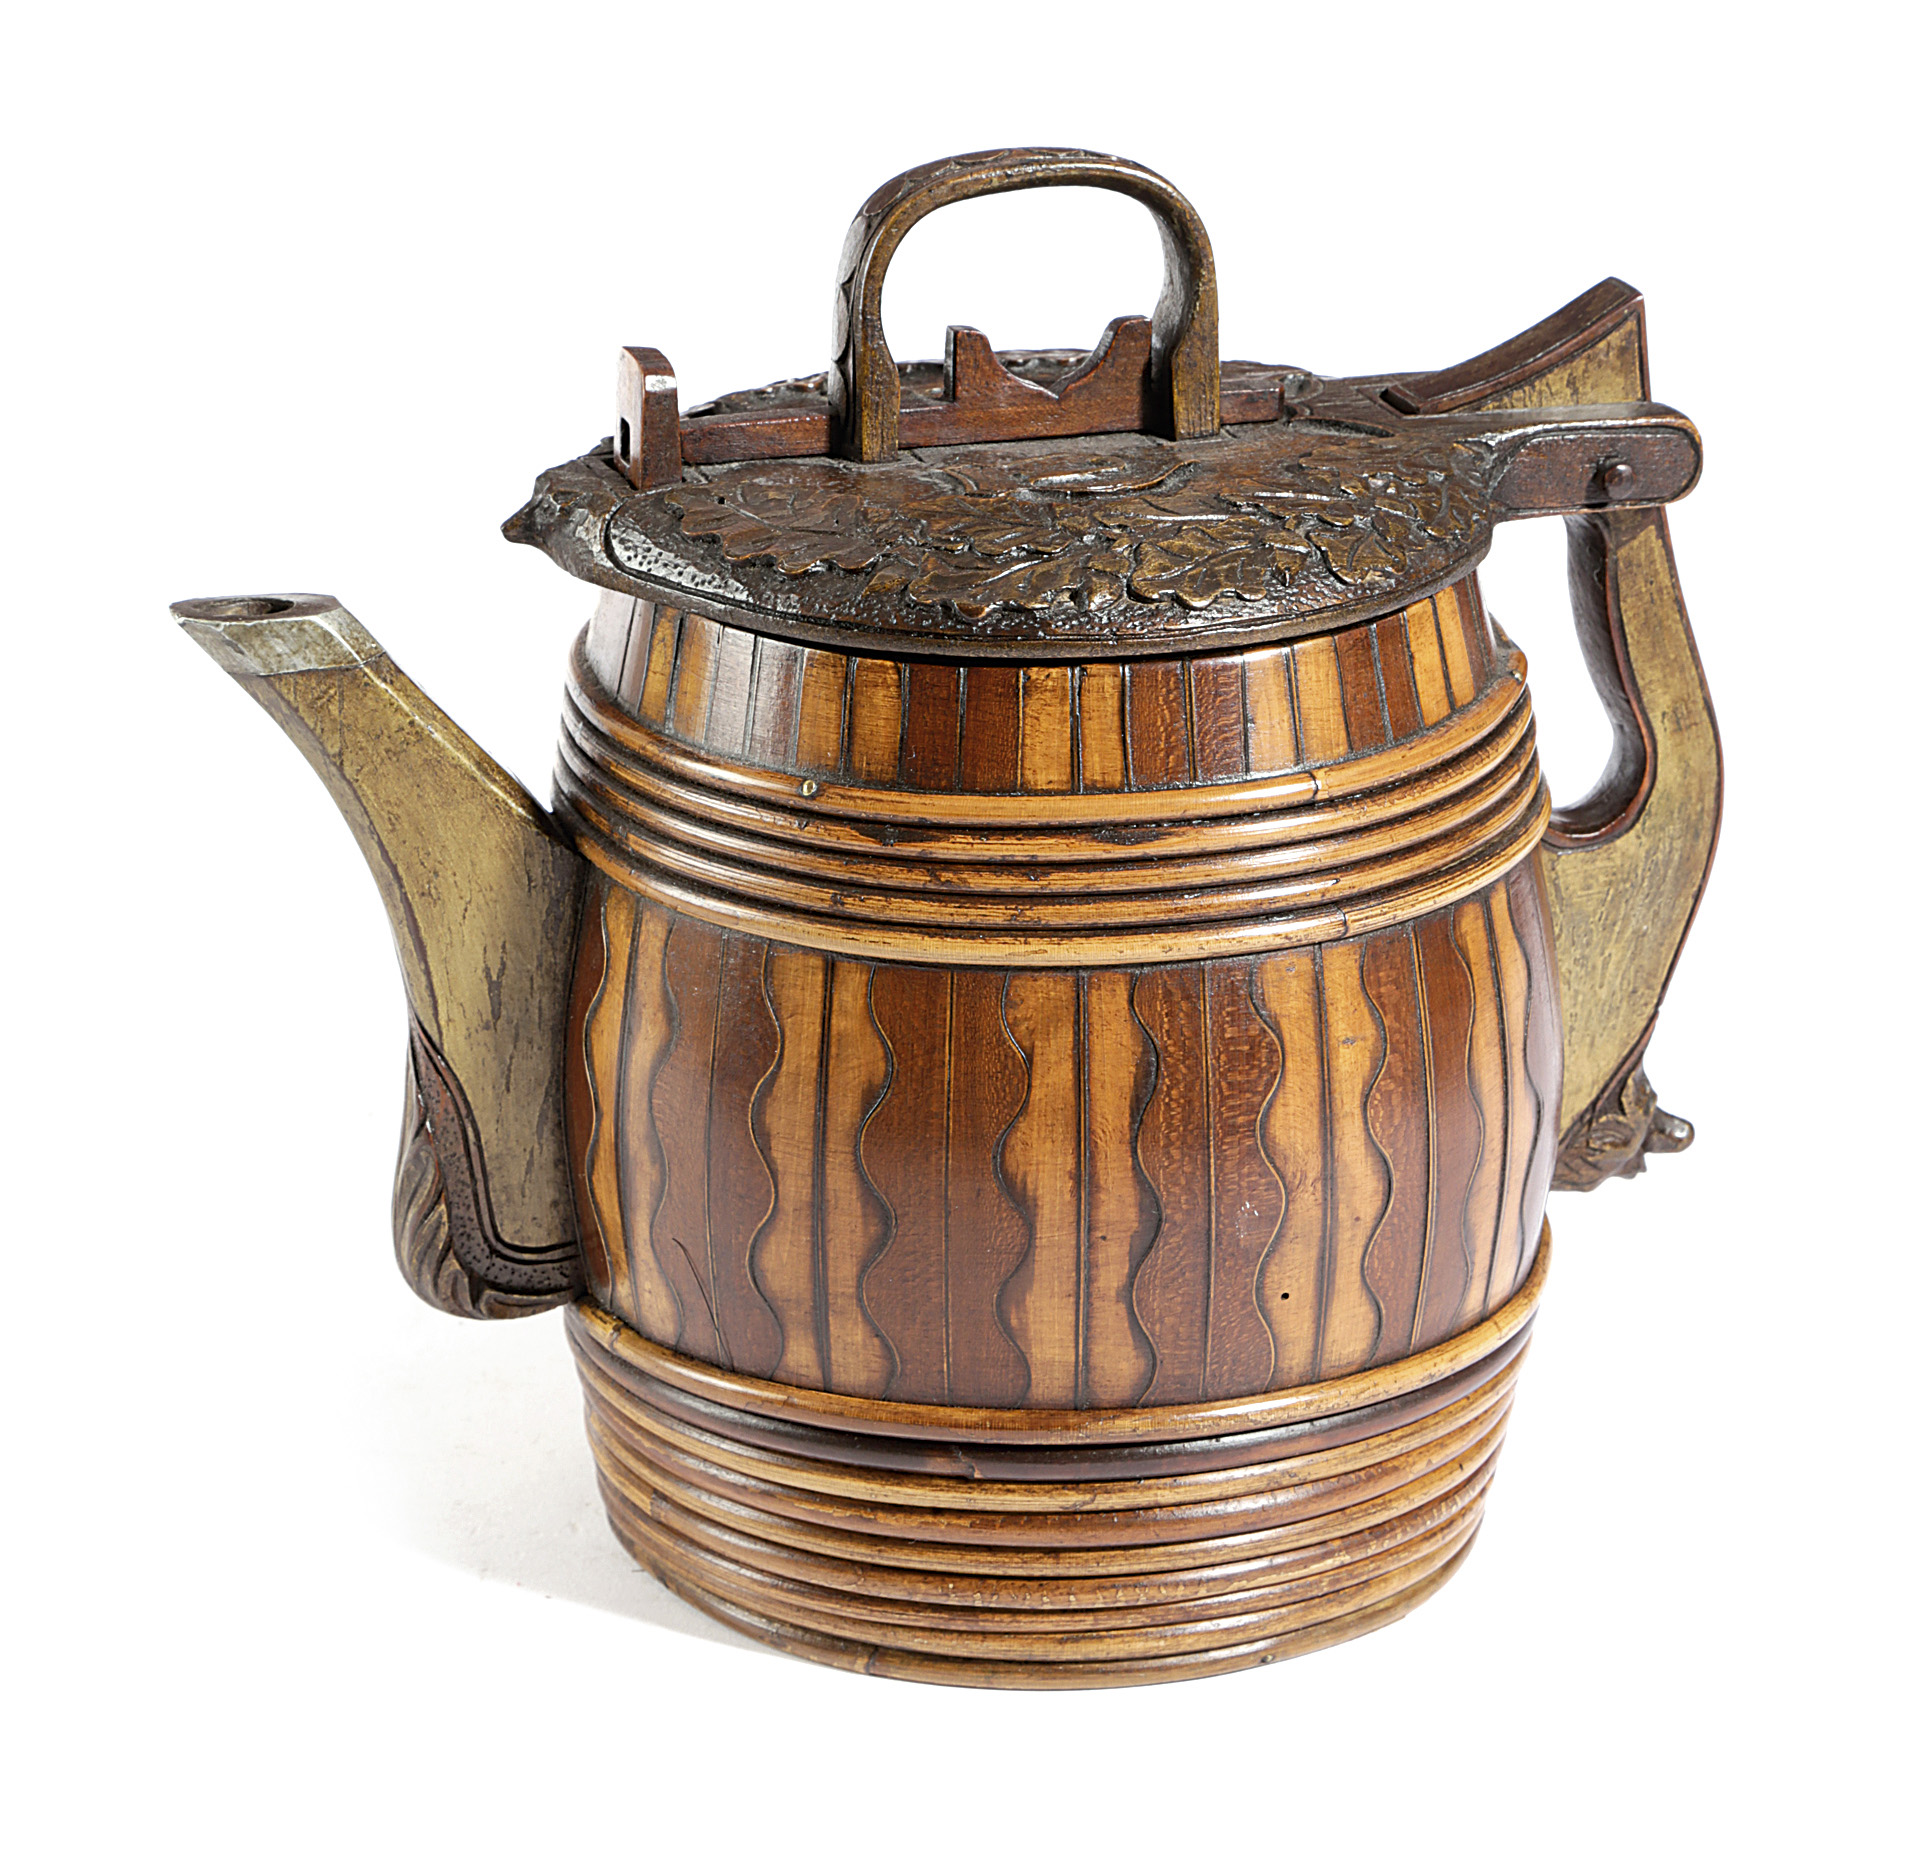 AN AUSTRO-HUNGARIAN TREEN BEER SERVING JUG C.1880 of staved construction, with bent wood reeded